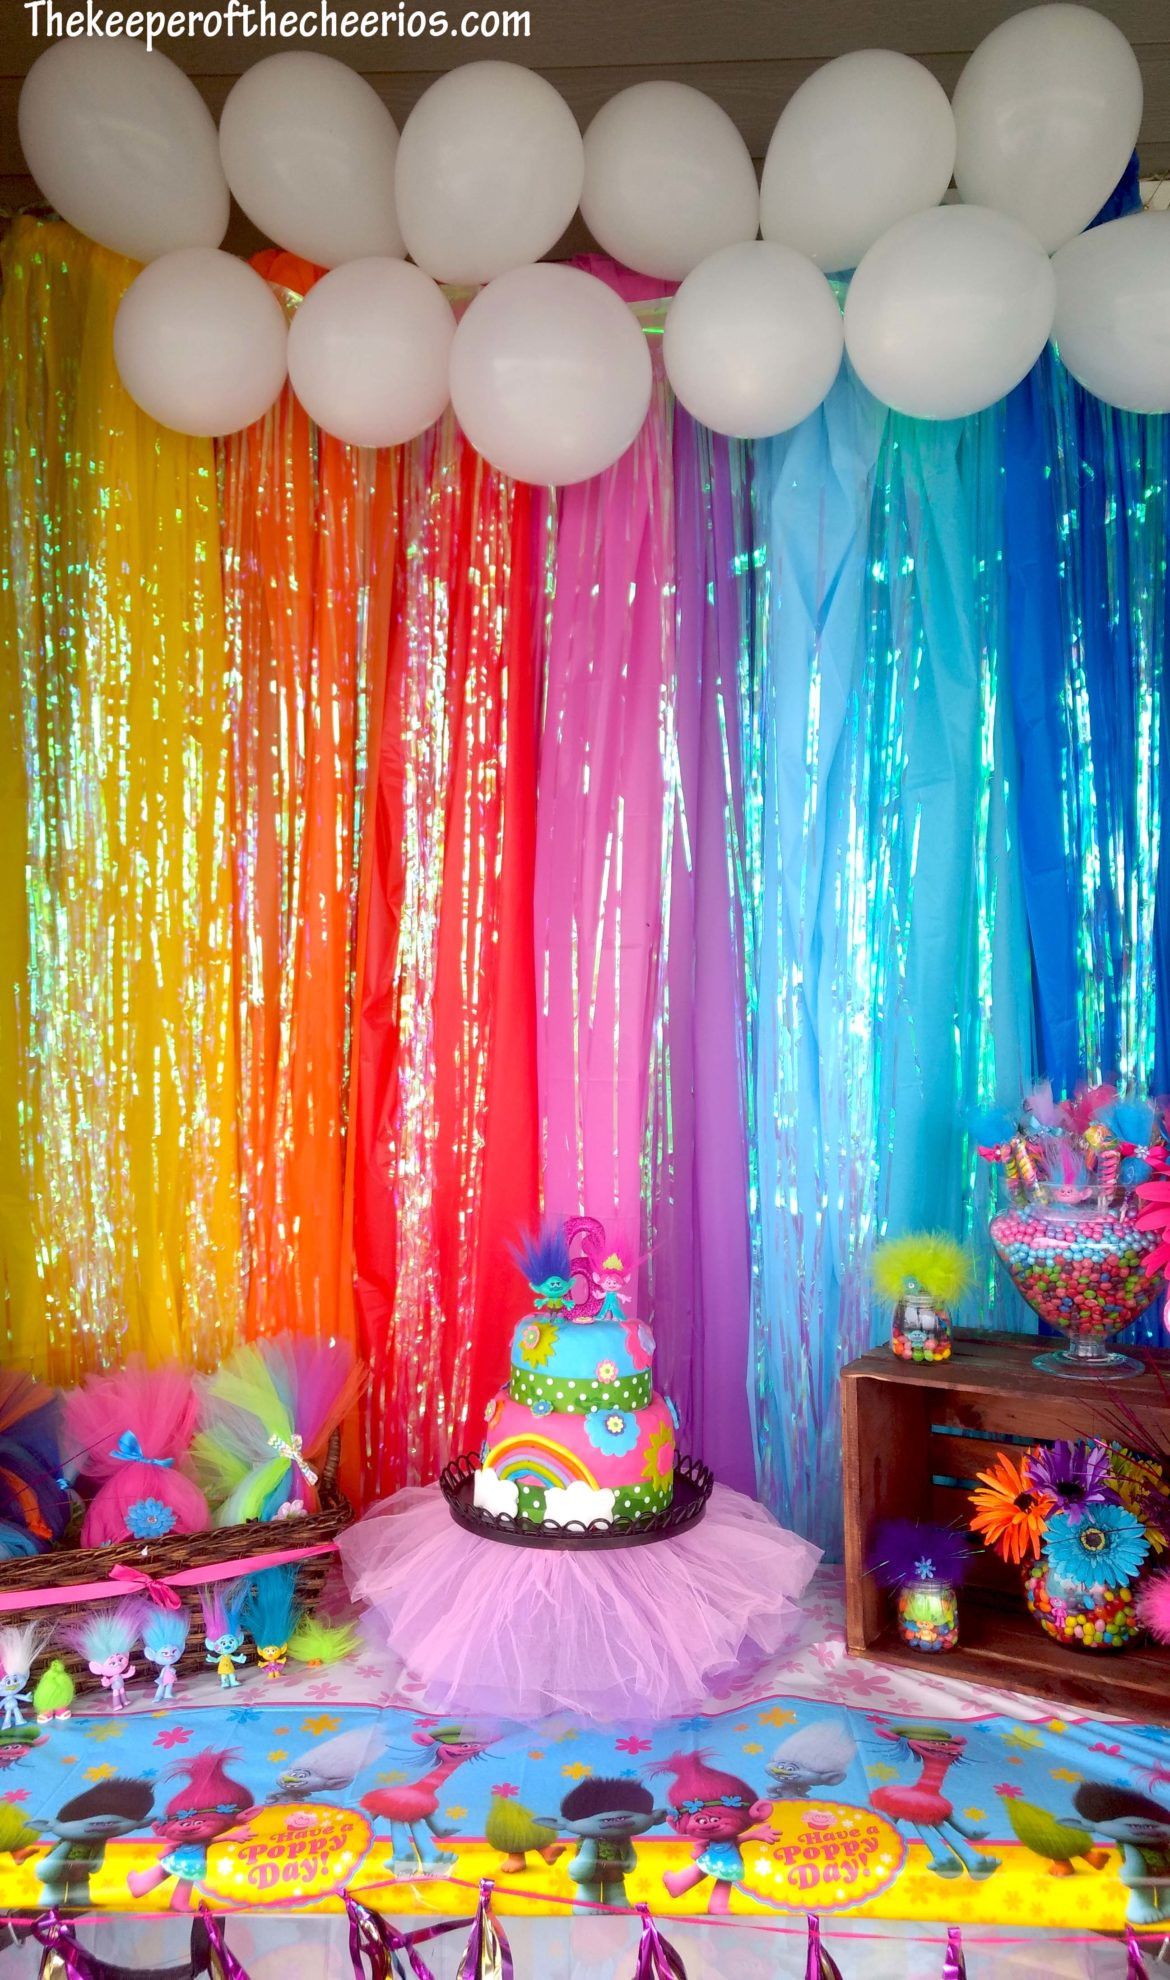 Trolls Bday Party Ideas
 Trolls Birthday Party The Keeper of the Cheerios